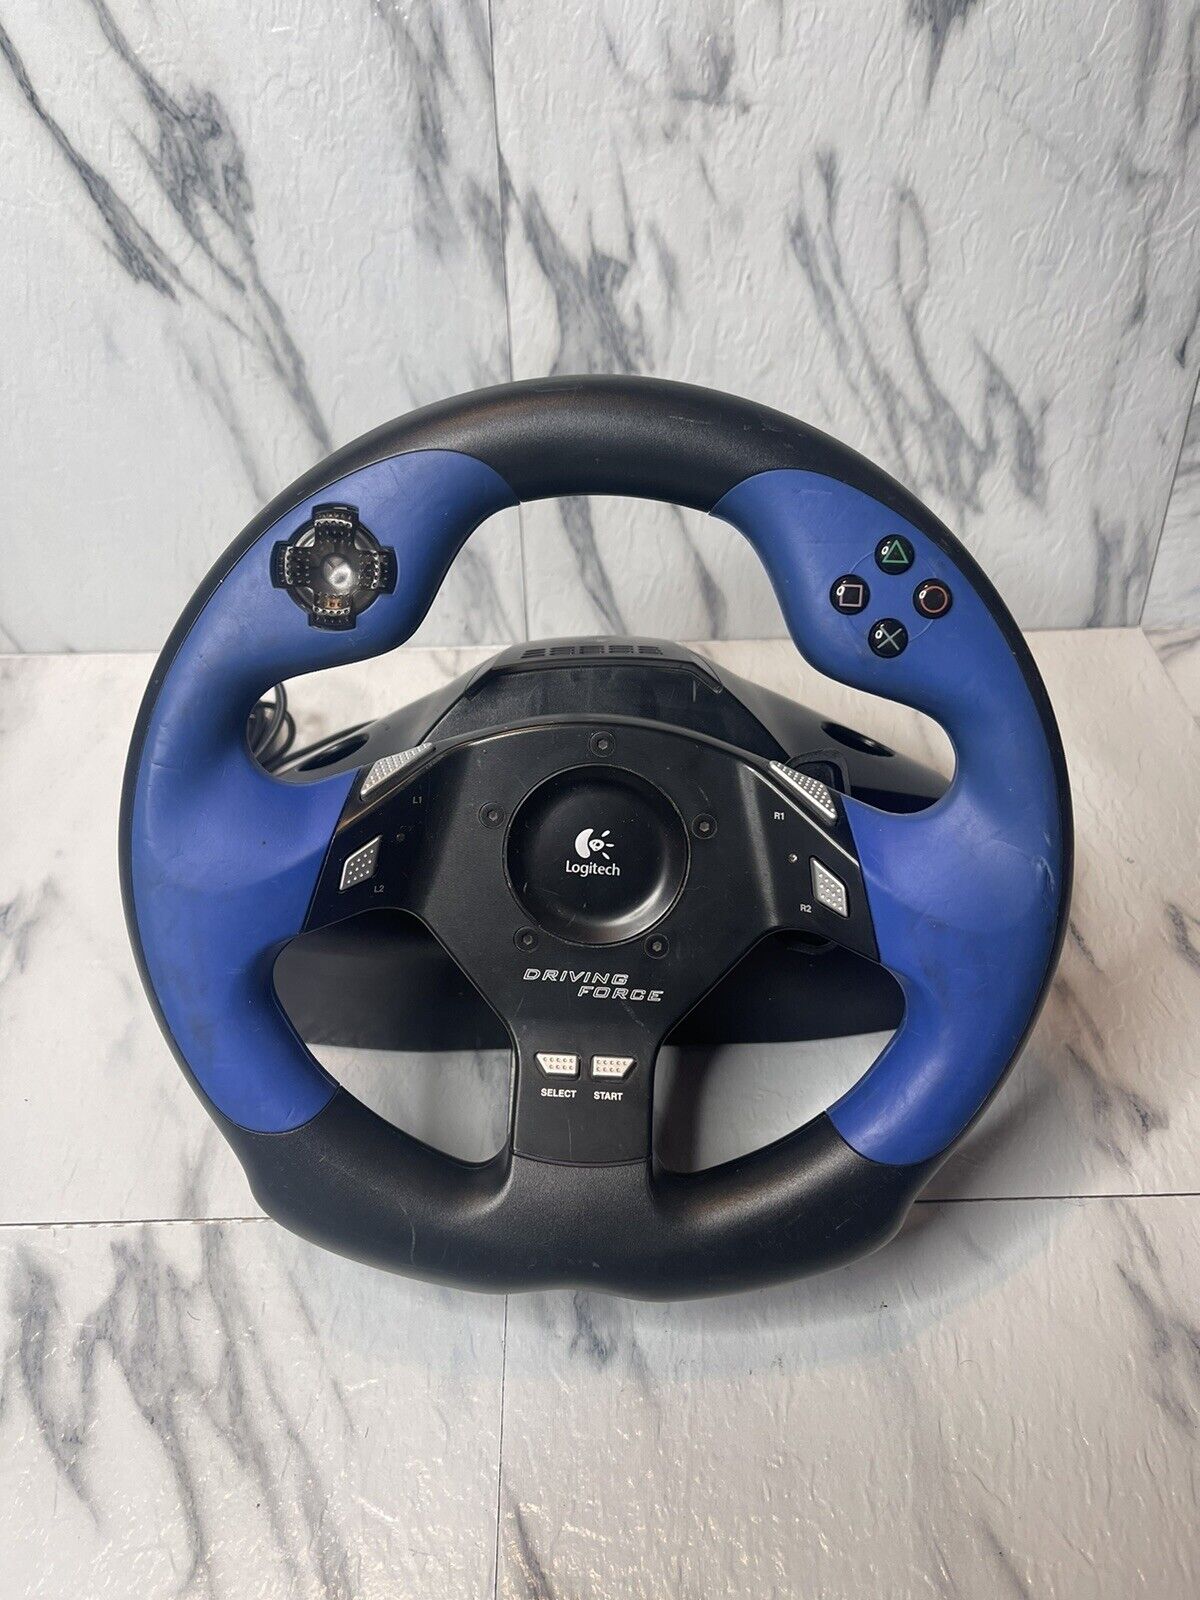 Logitech Driving Force EX Steering Wheel ONLY - PS2 - Tested &amp; Working eBay